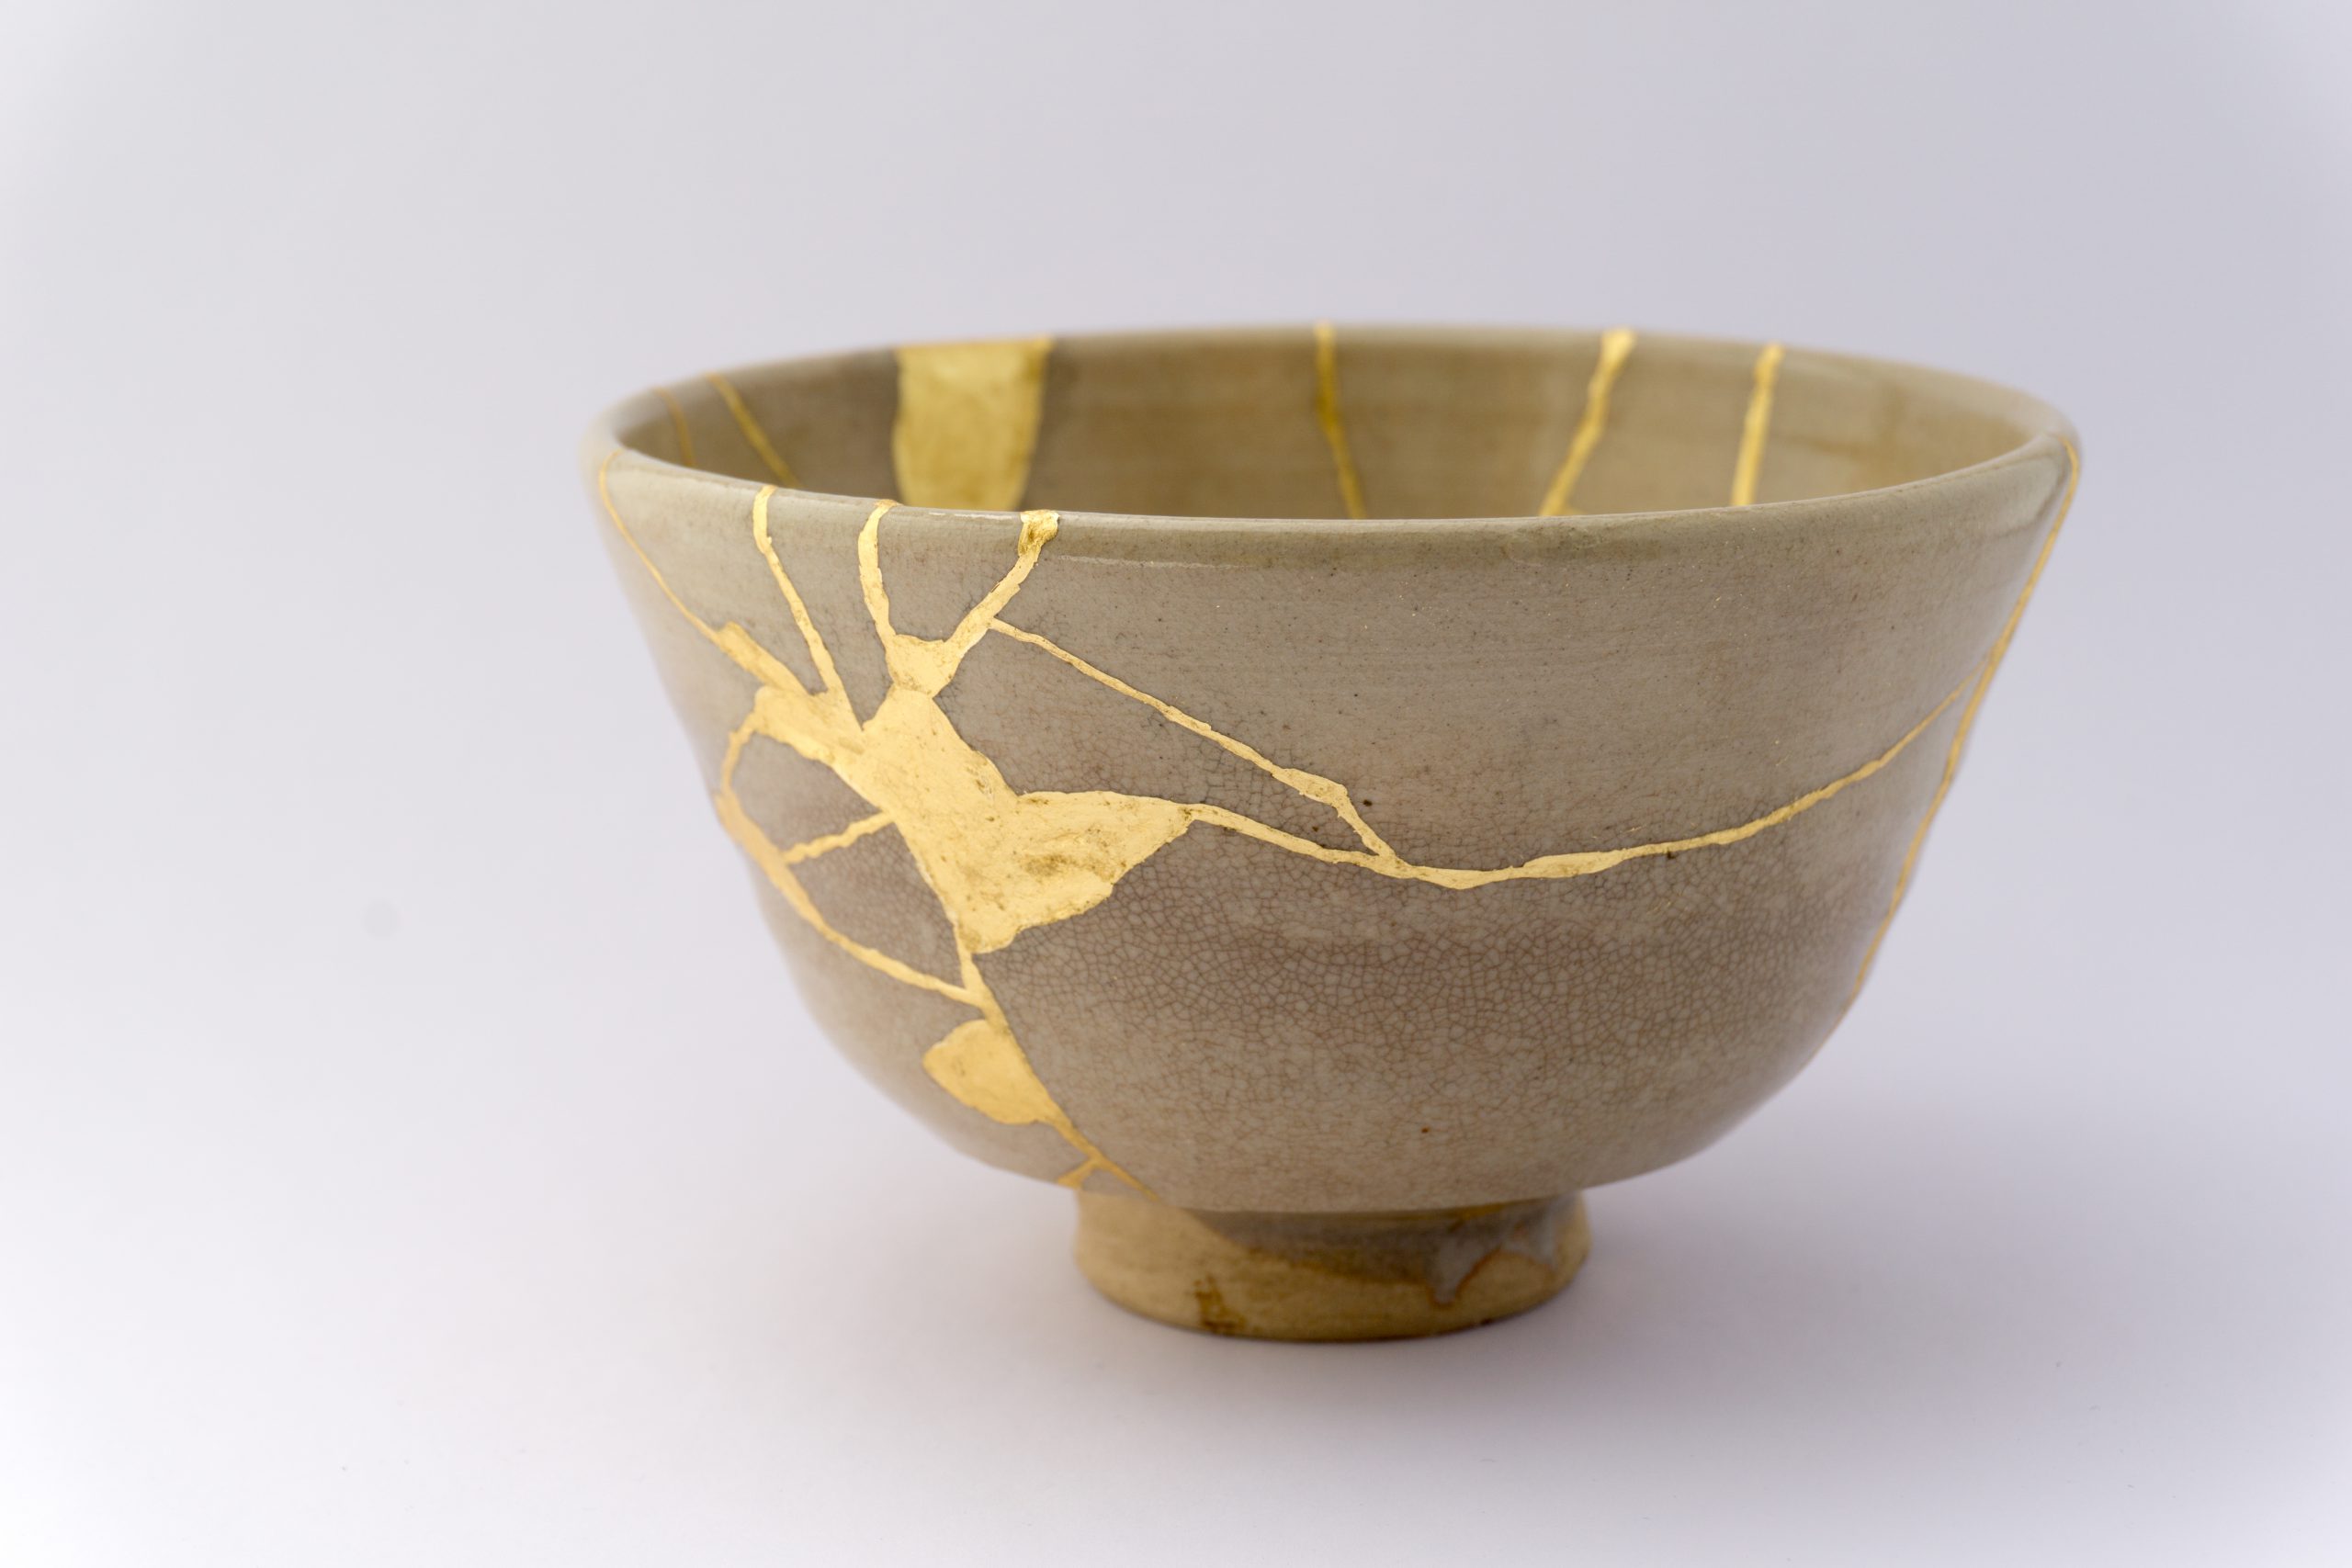 An example of Kintsugi Pottery